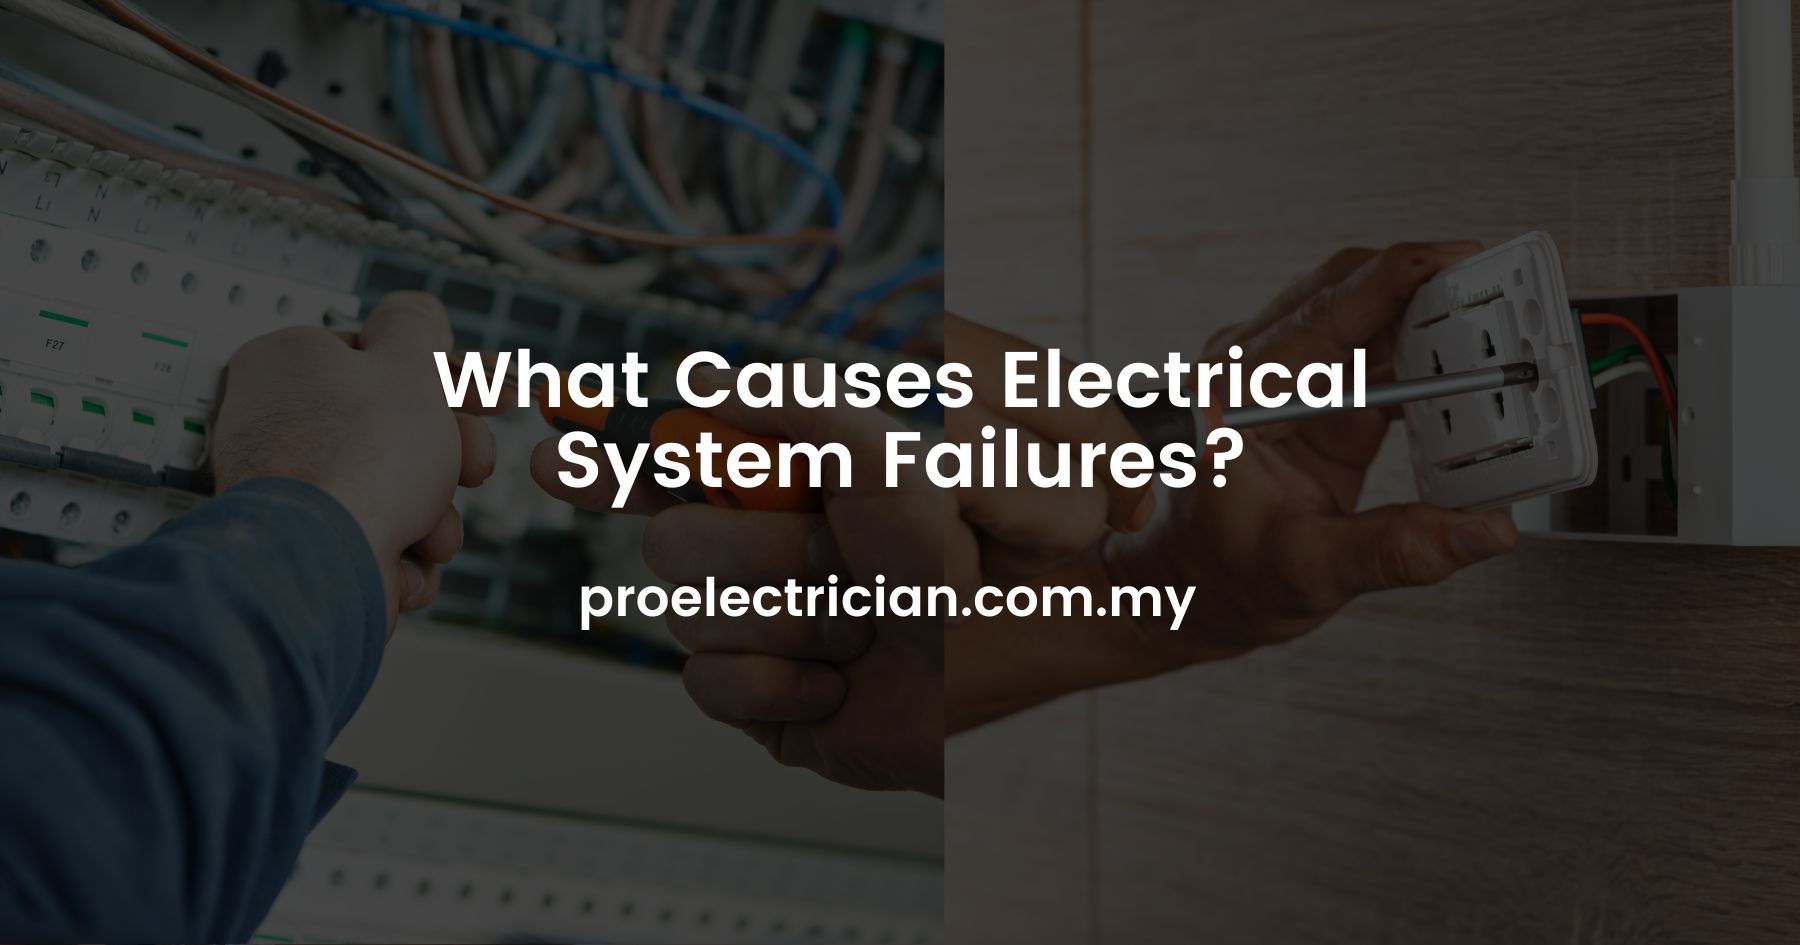 What Causes Electrical System Failures